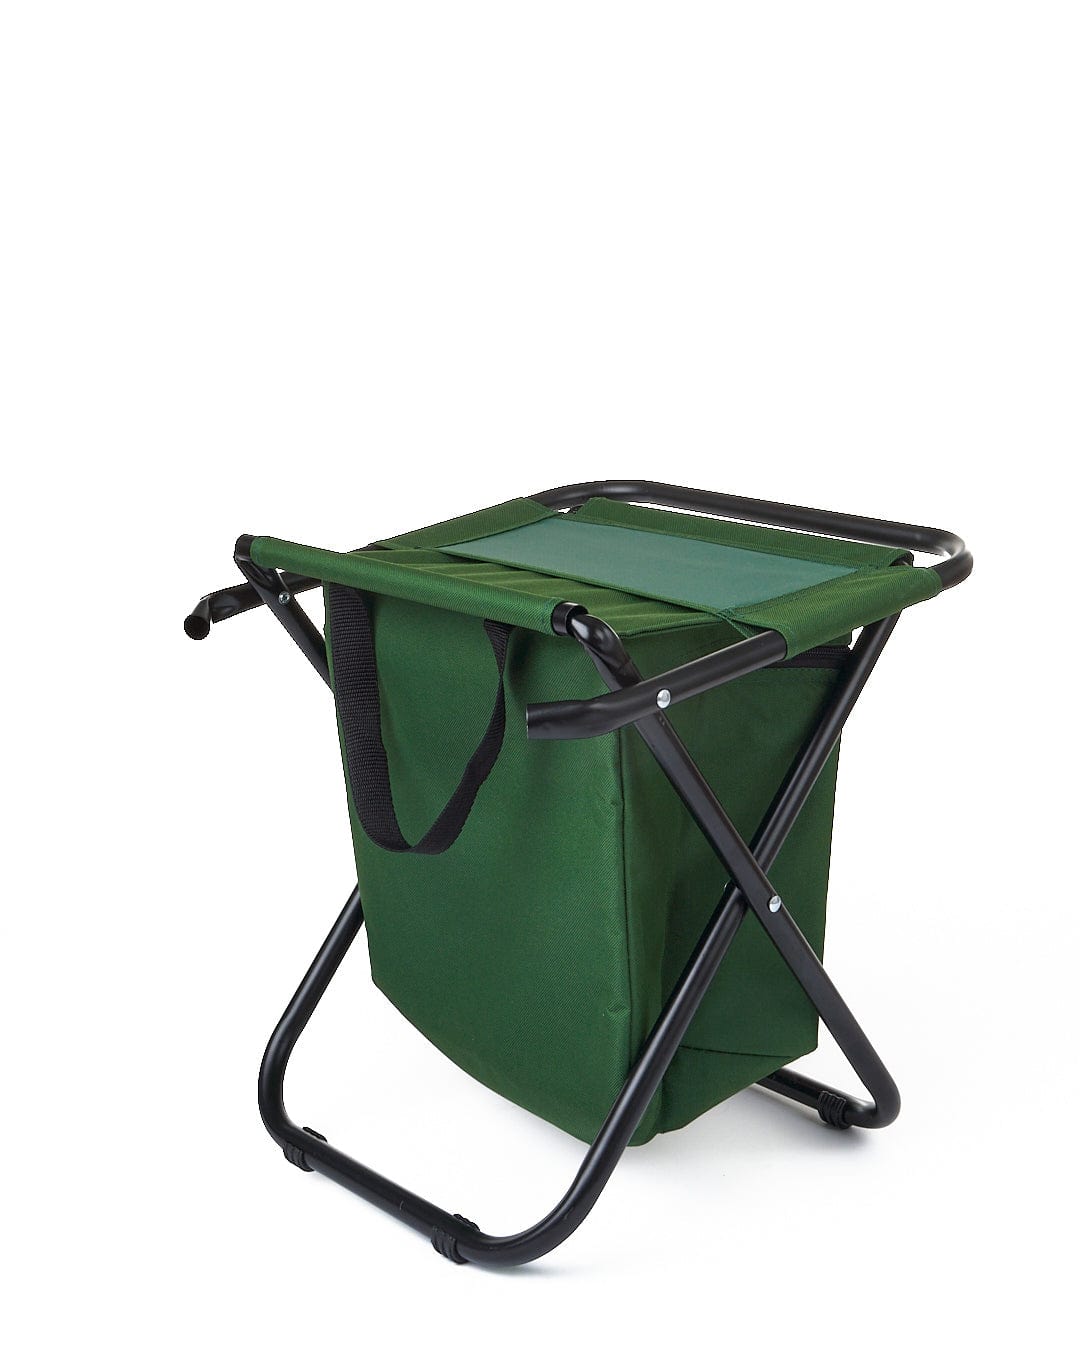 A Spectator - Foldable Chair with Cooler Bag - Dark Green by Saltrock with a black handle.